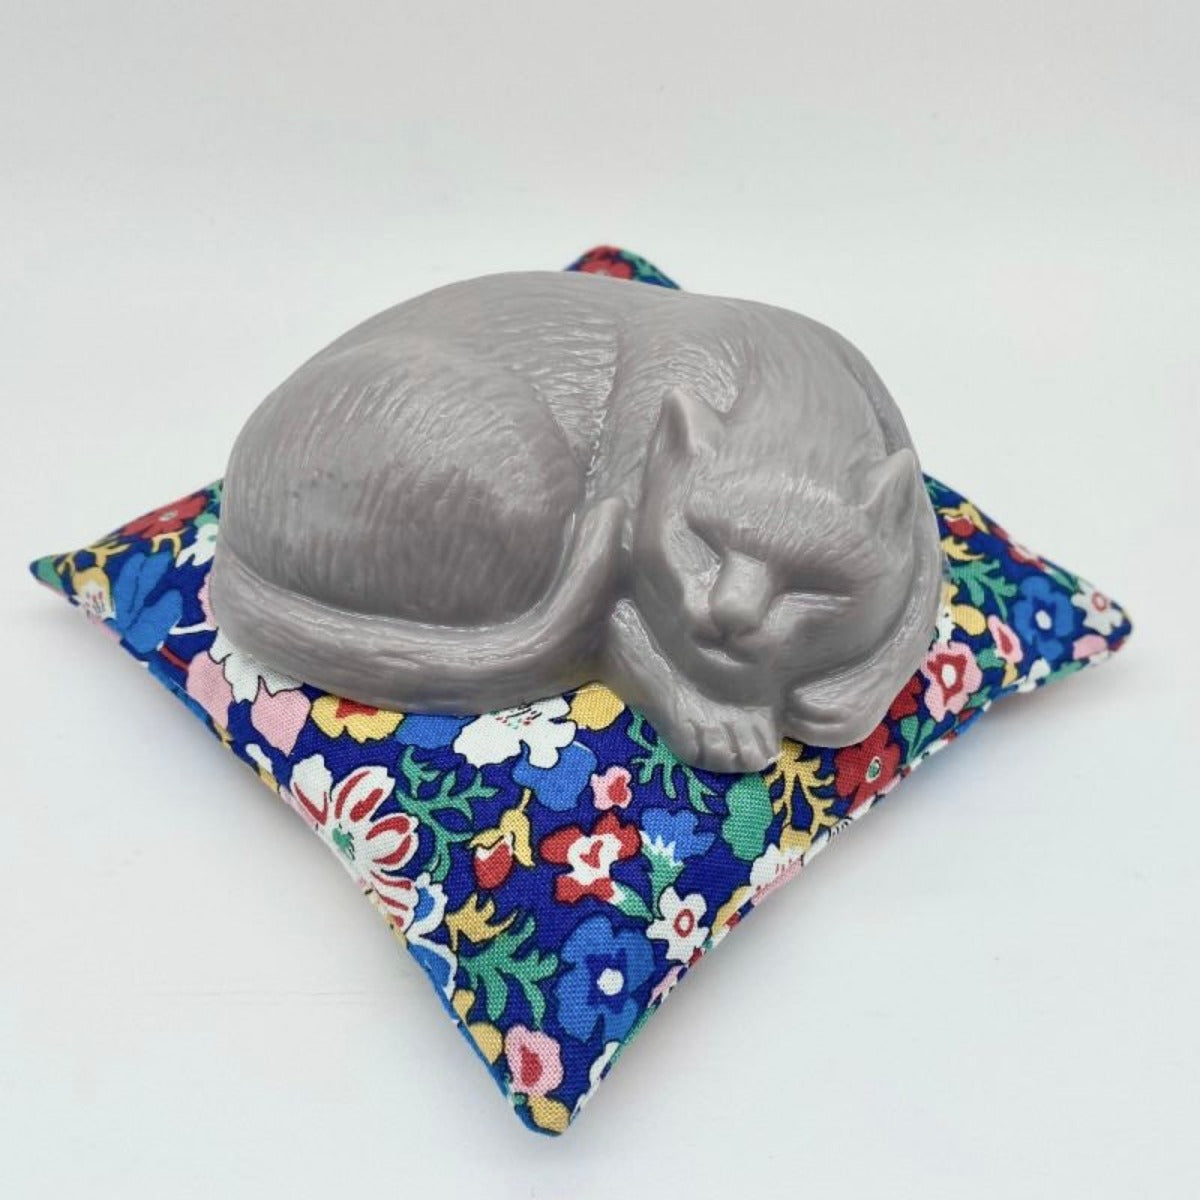 Mindfully sleeping gray cat-shaped soap, embodying the essence of mindful beauty, nestled on a vibrant floral pillow adorned with bright colors of red, blue, white, and yellow